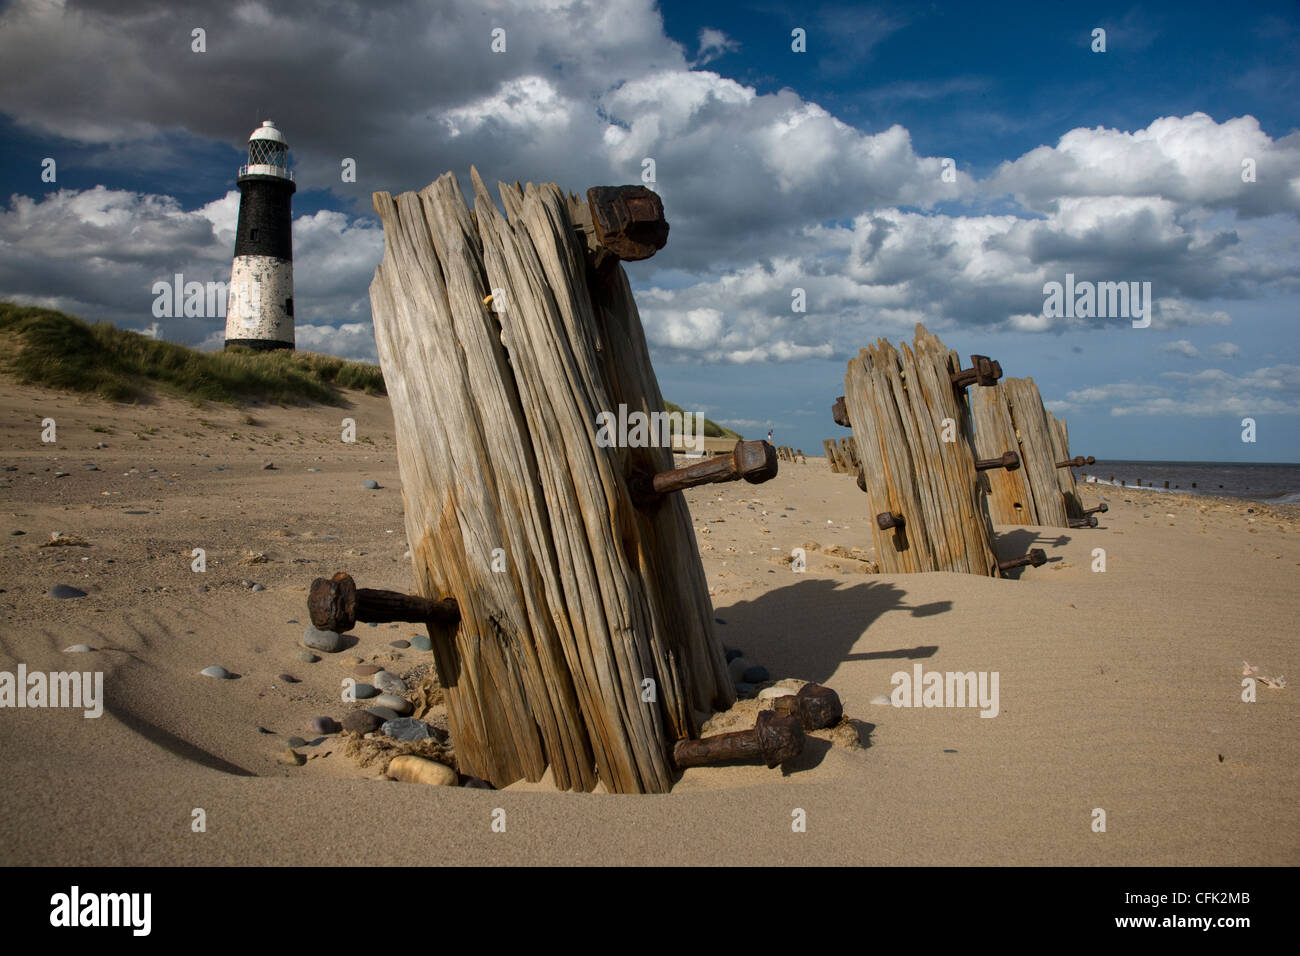 Wooden posts and groynes on the beach in front of the black and white lighthouse at Spurn Point, Yorkshire Stock Photo